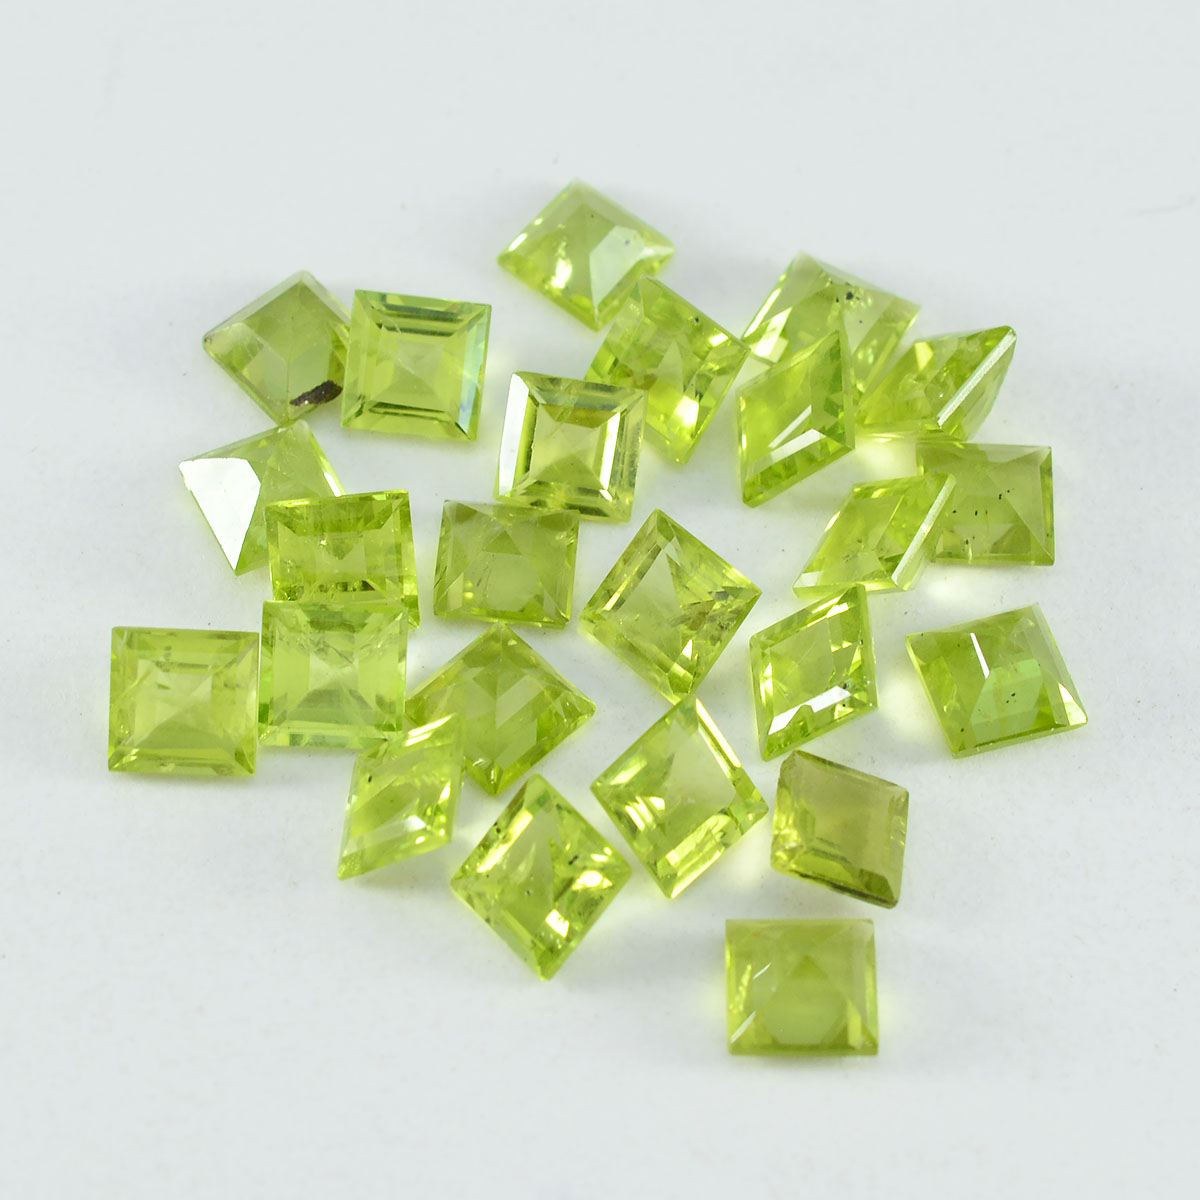 Riyogems 1PC Real Green Peridot Faceted 5x5 mm Square Shape nice-looking Quality Loose Gemstone